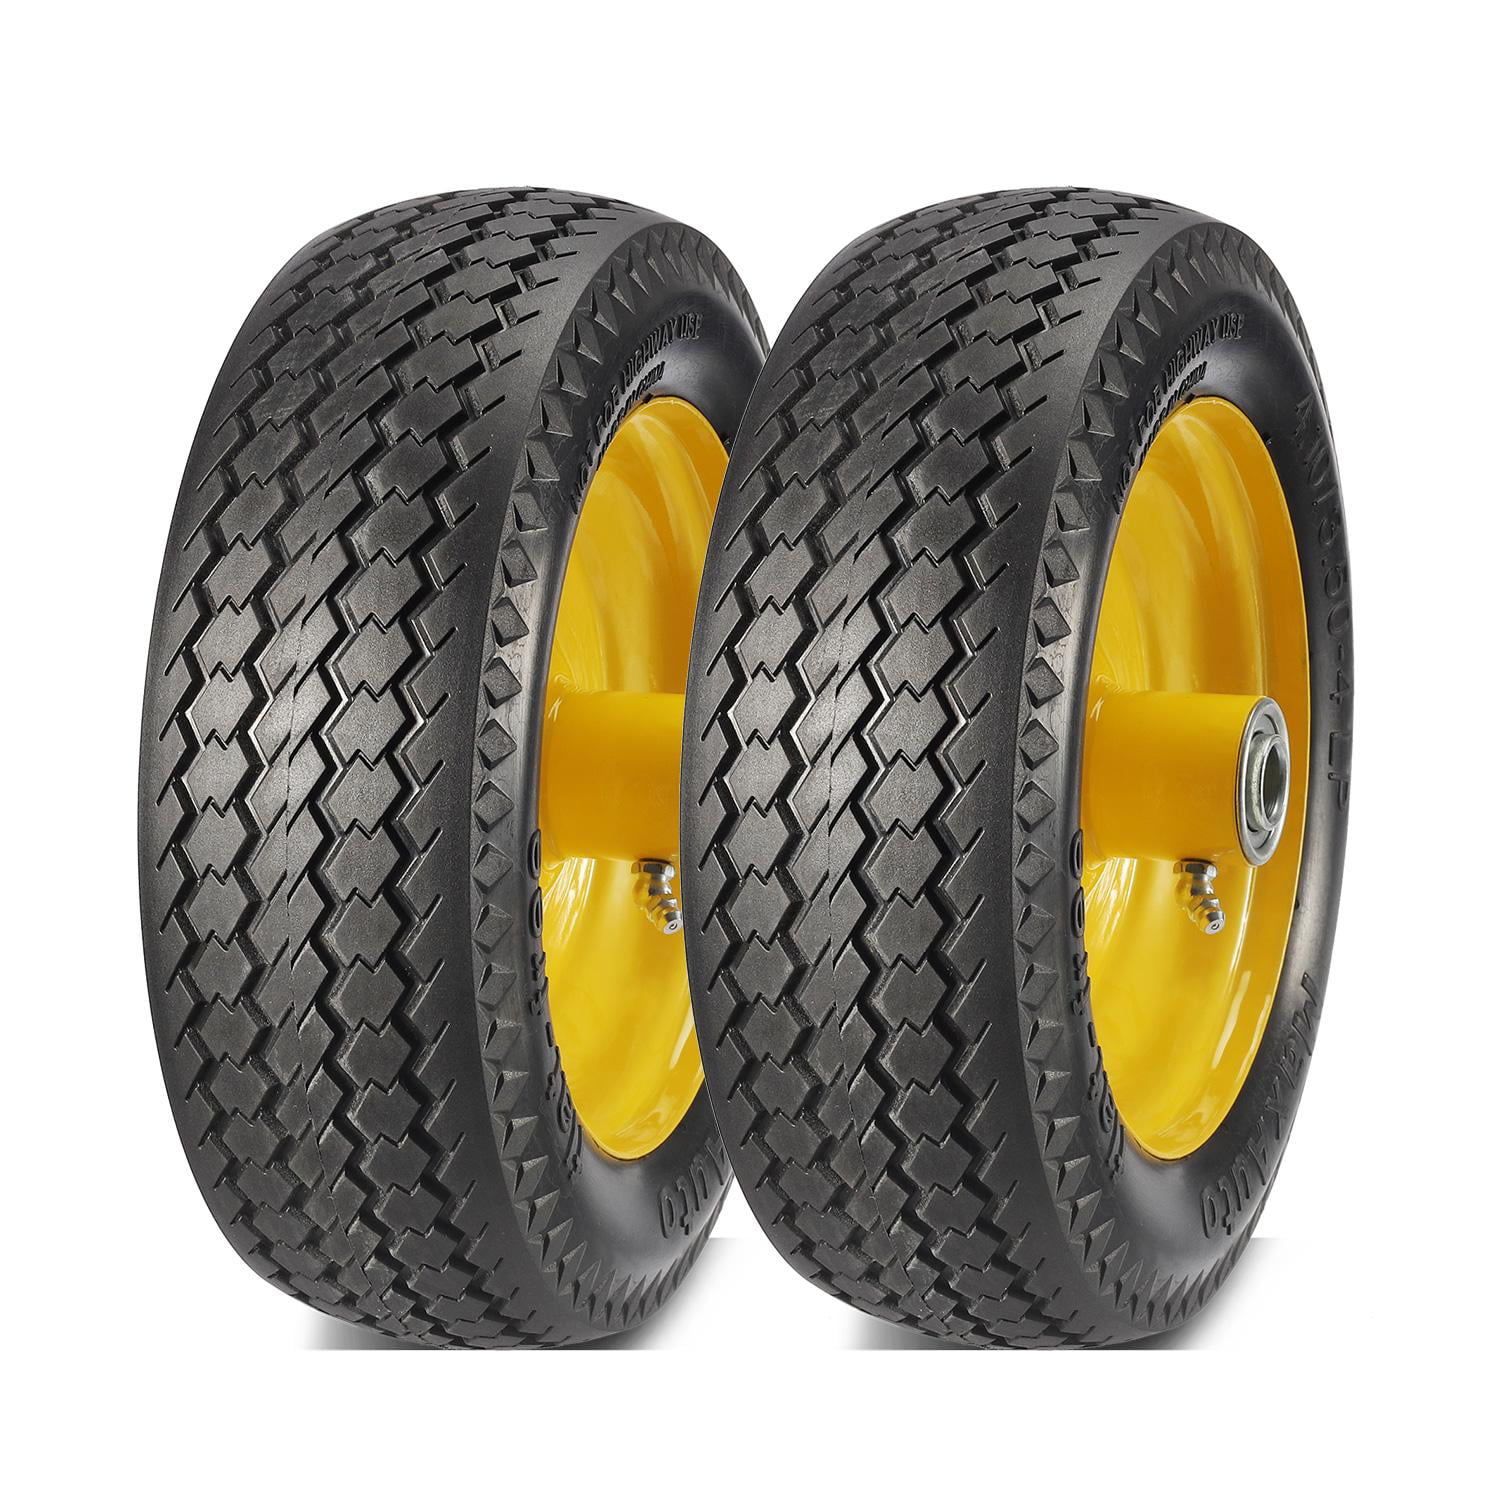 Yellow Steel 5/8 Bearings MaxAuto 4-Pack 10 Inch Solid Rubber Tyre Wheels Garden Wagon Cart Trolley Tires 4.10/3.50-4 2.25 Offset Hub 